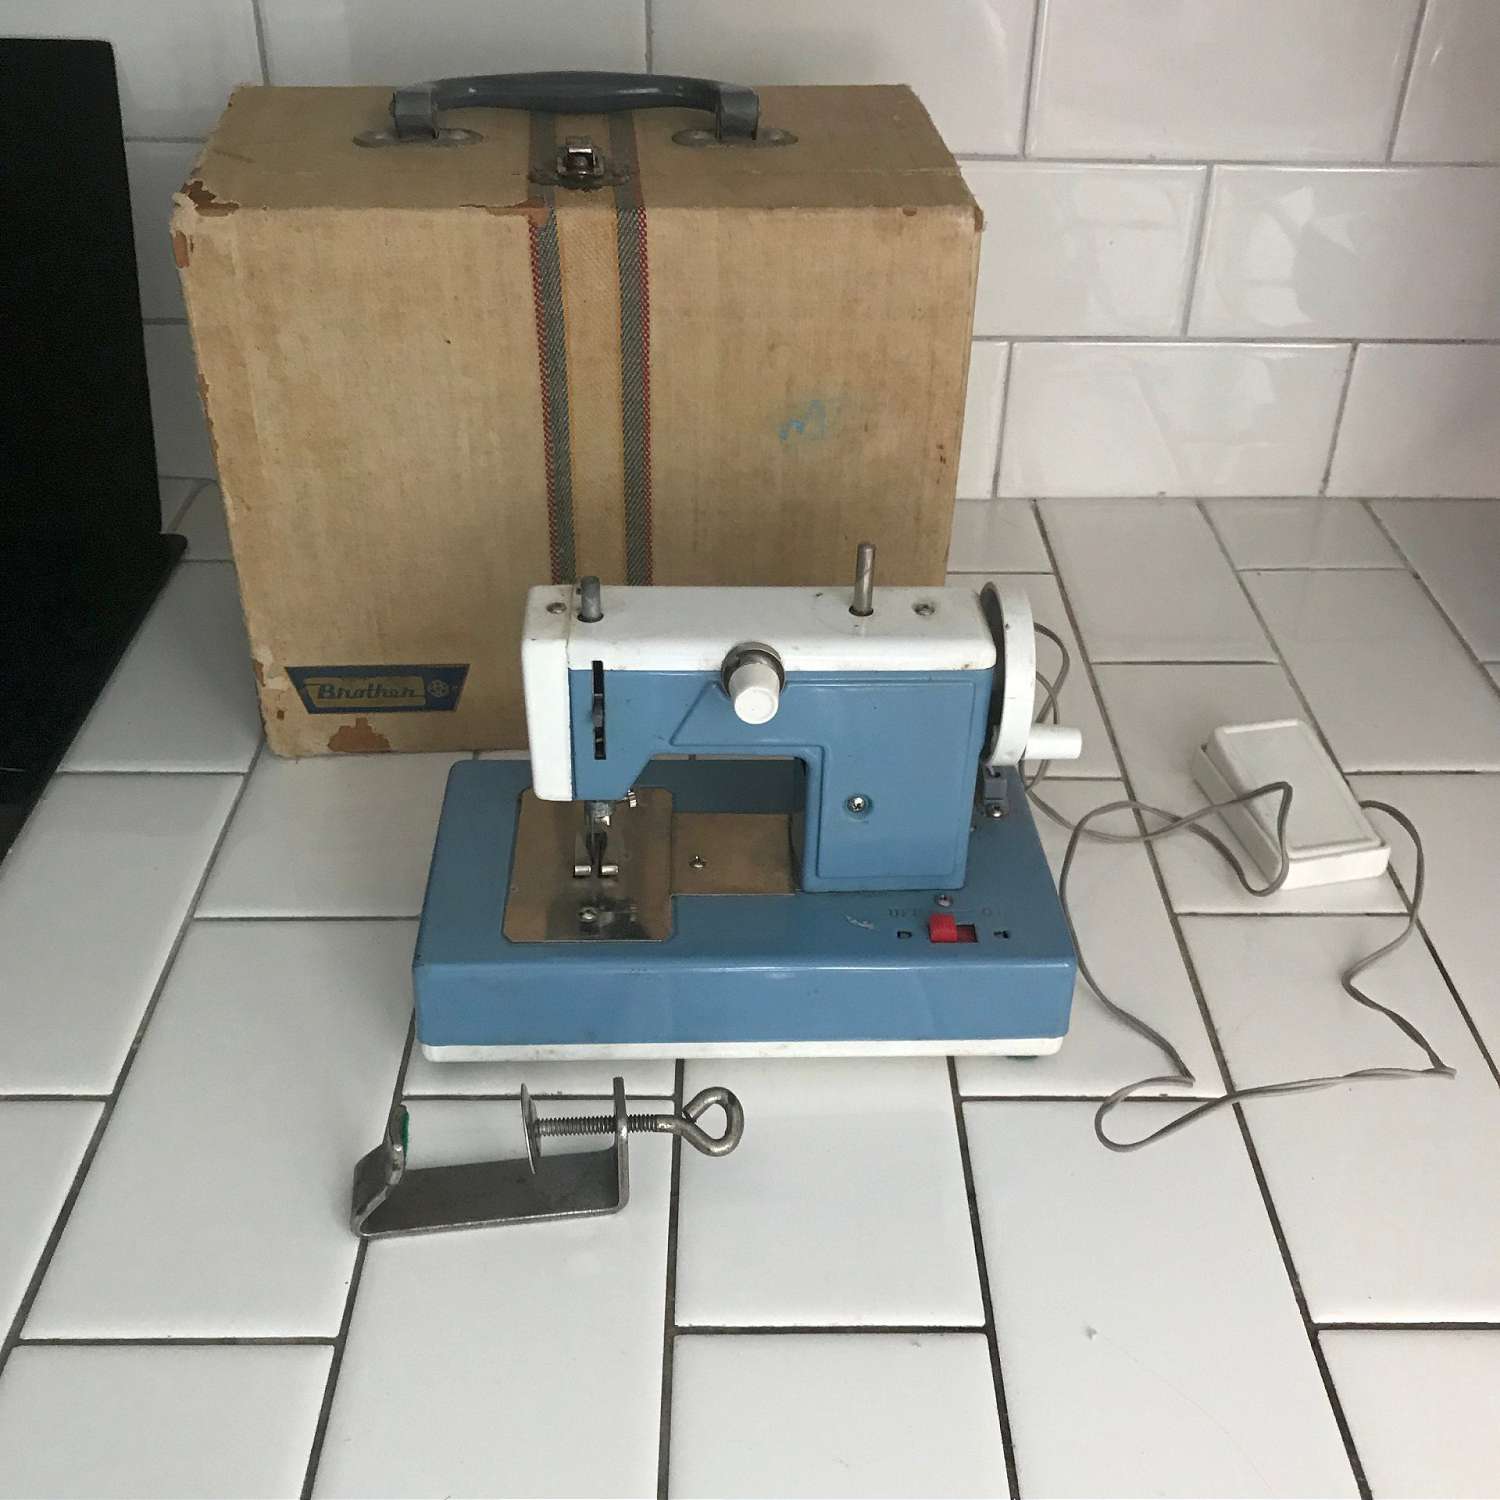 Hand Held Sewing Machine Bicor 200 Battery Operated - By Brother Inc for  Sale in Corona, CA - OfferUp